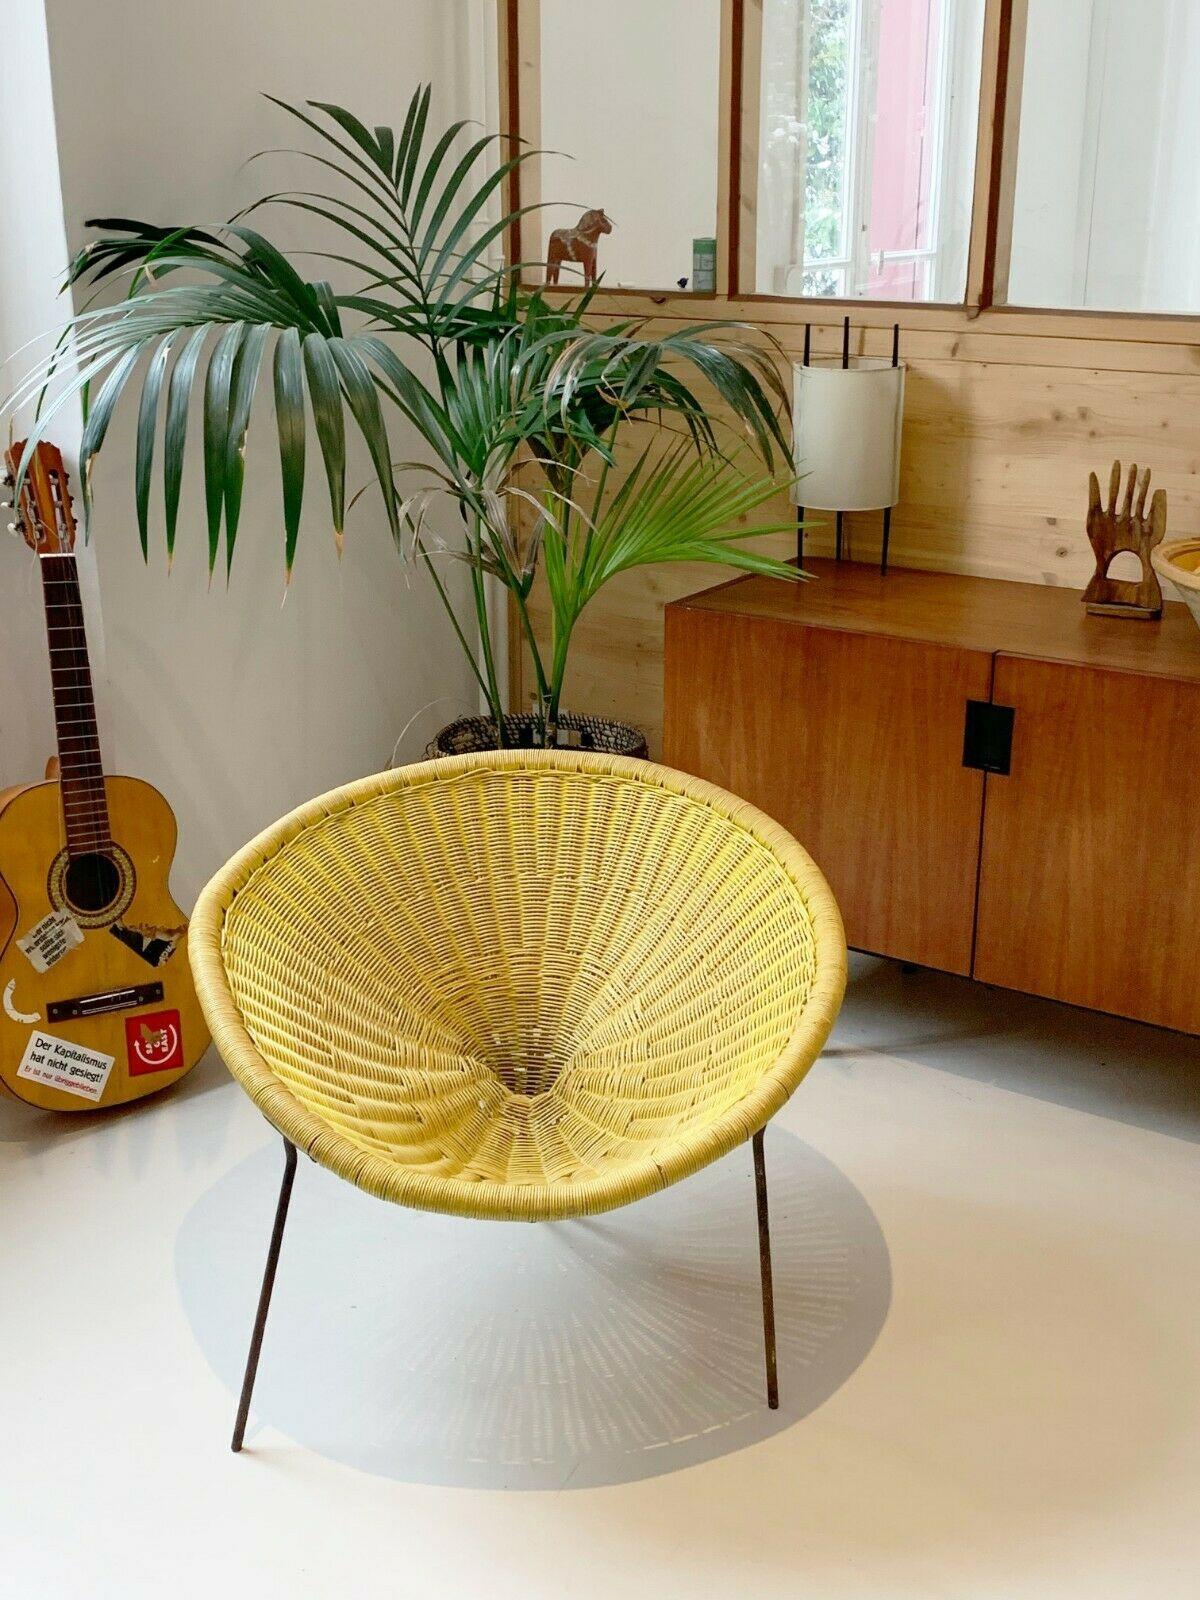 Rare armchair Roberto Mango
Note that the seat is slightly damaged. Little restoration to be expected
790 Euros

Roberto Mango club chair, woven wicker seat shell and a tube steel base. Lacquered steel and rare yellow rattan, circa 1952, Italy.